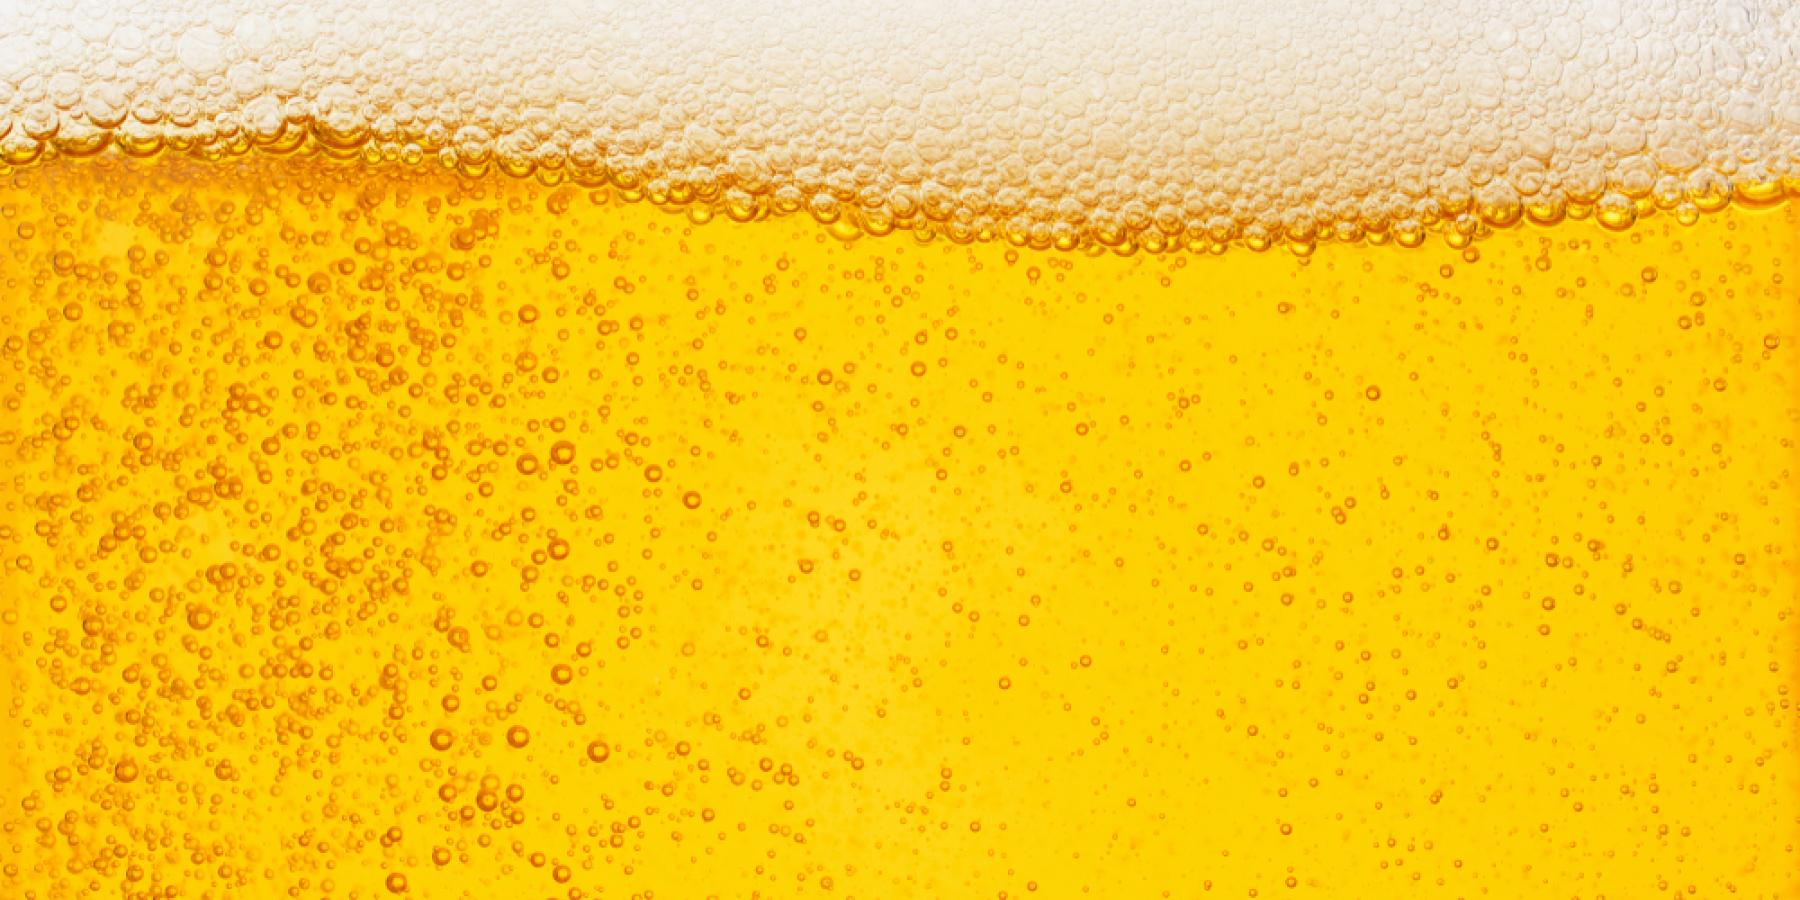 Close-up of a glass of beer showing the head and effervescence